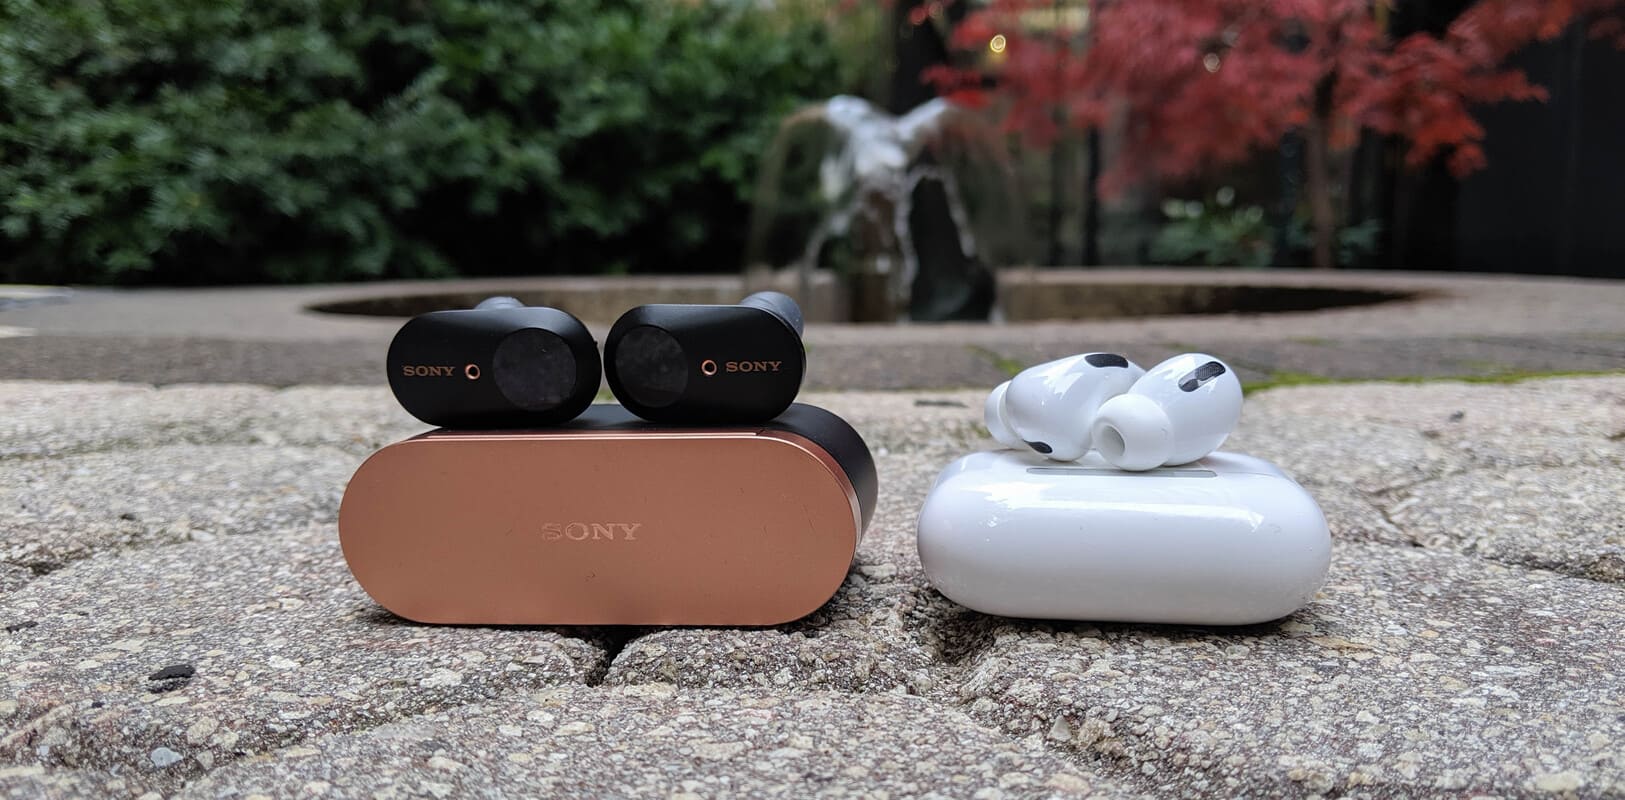 Apple AirPods Pro vs Sony WF-1000XM3: Which is Better and Which Wireless Headphones to Buy? Reviews from myheadphone.desigusxpro.com/en/